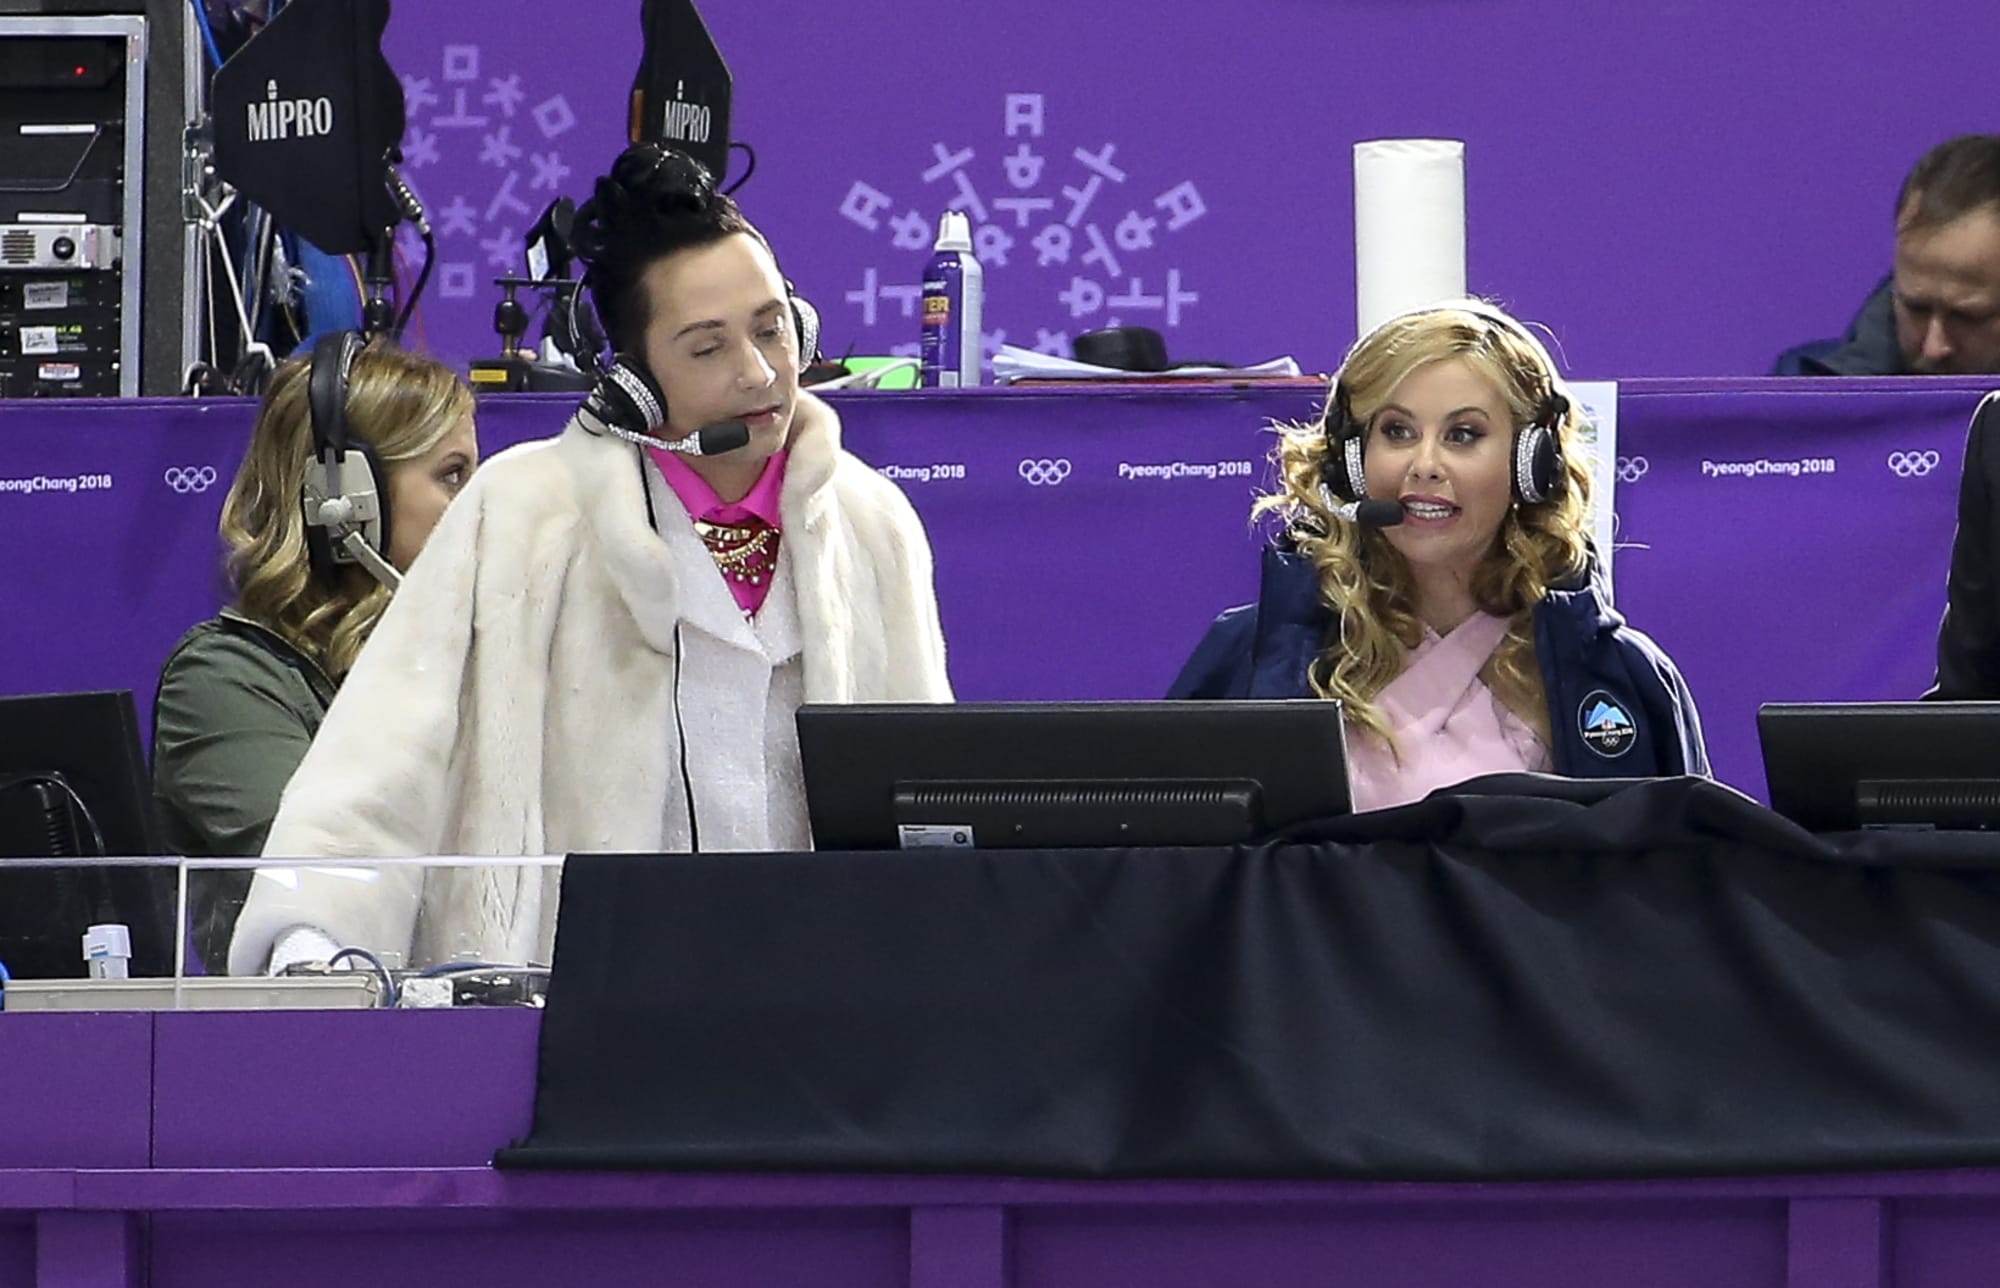 Who are the commentators of the NBC figure skating live stream?